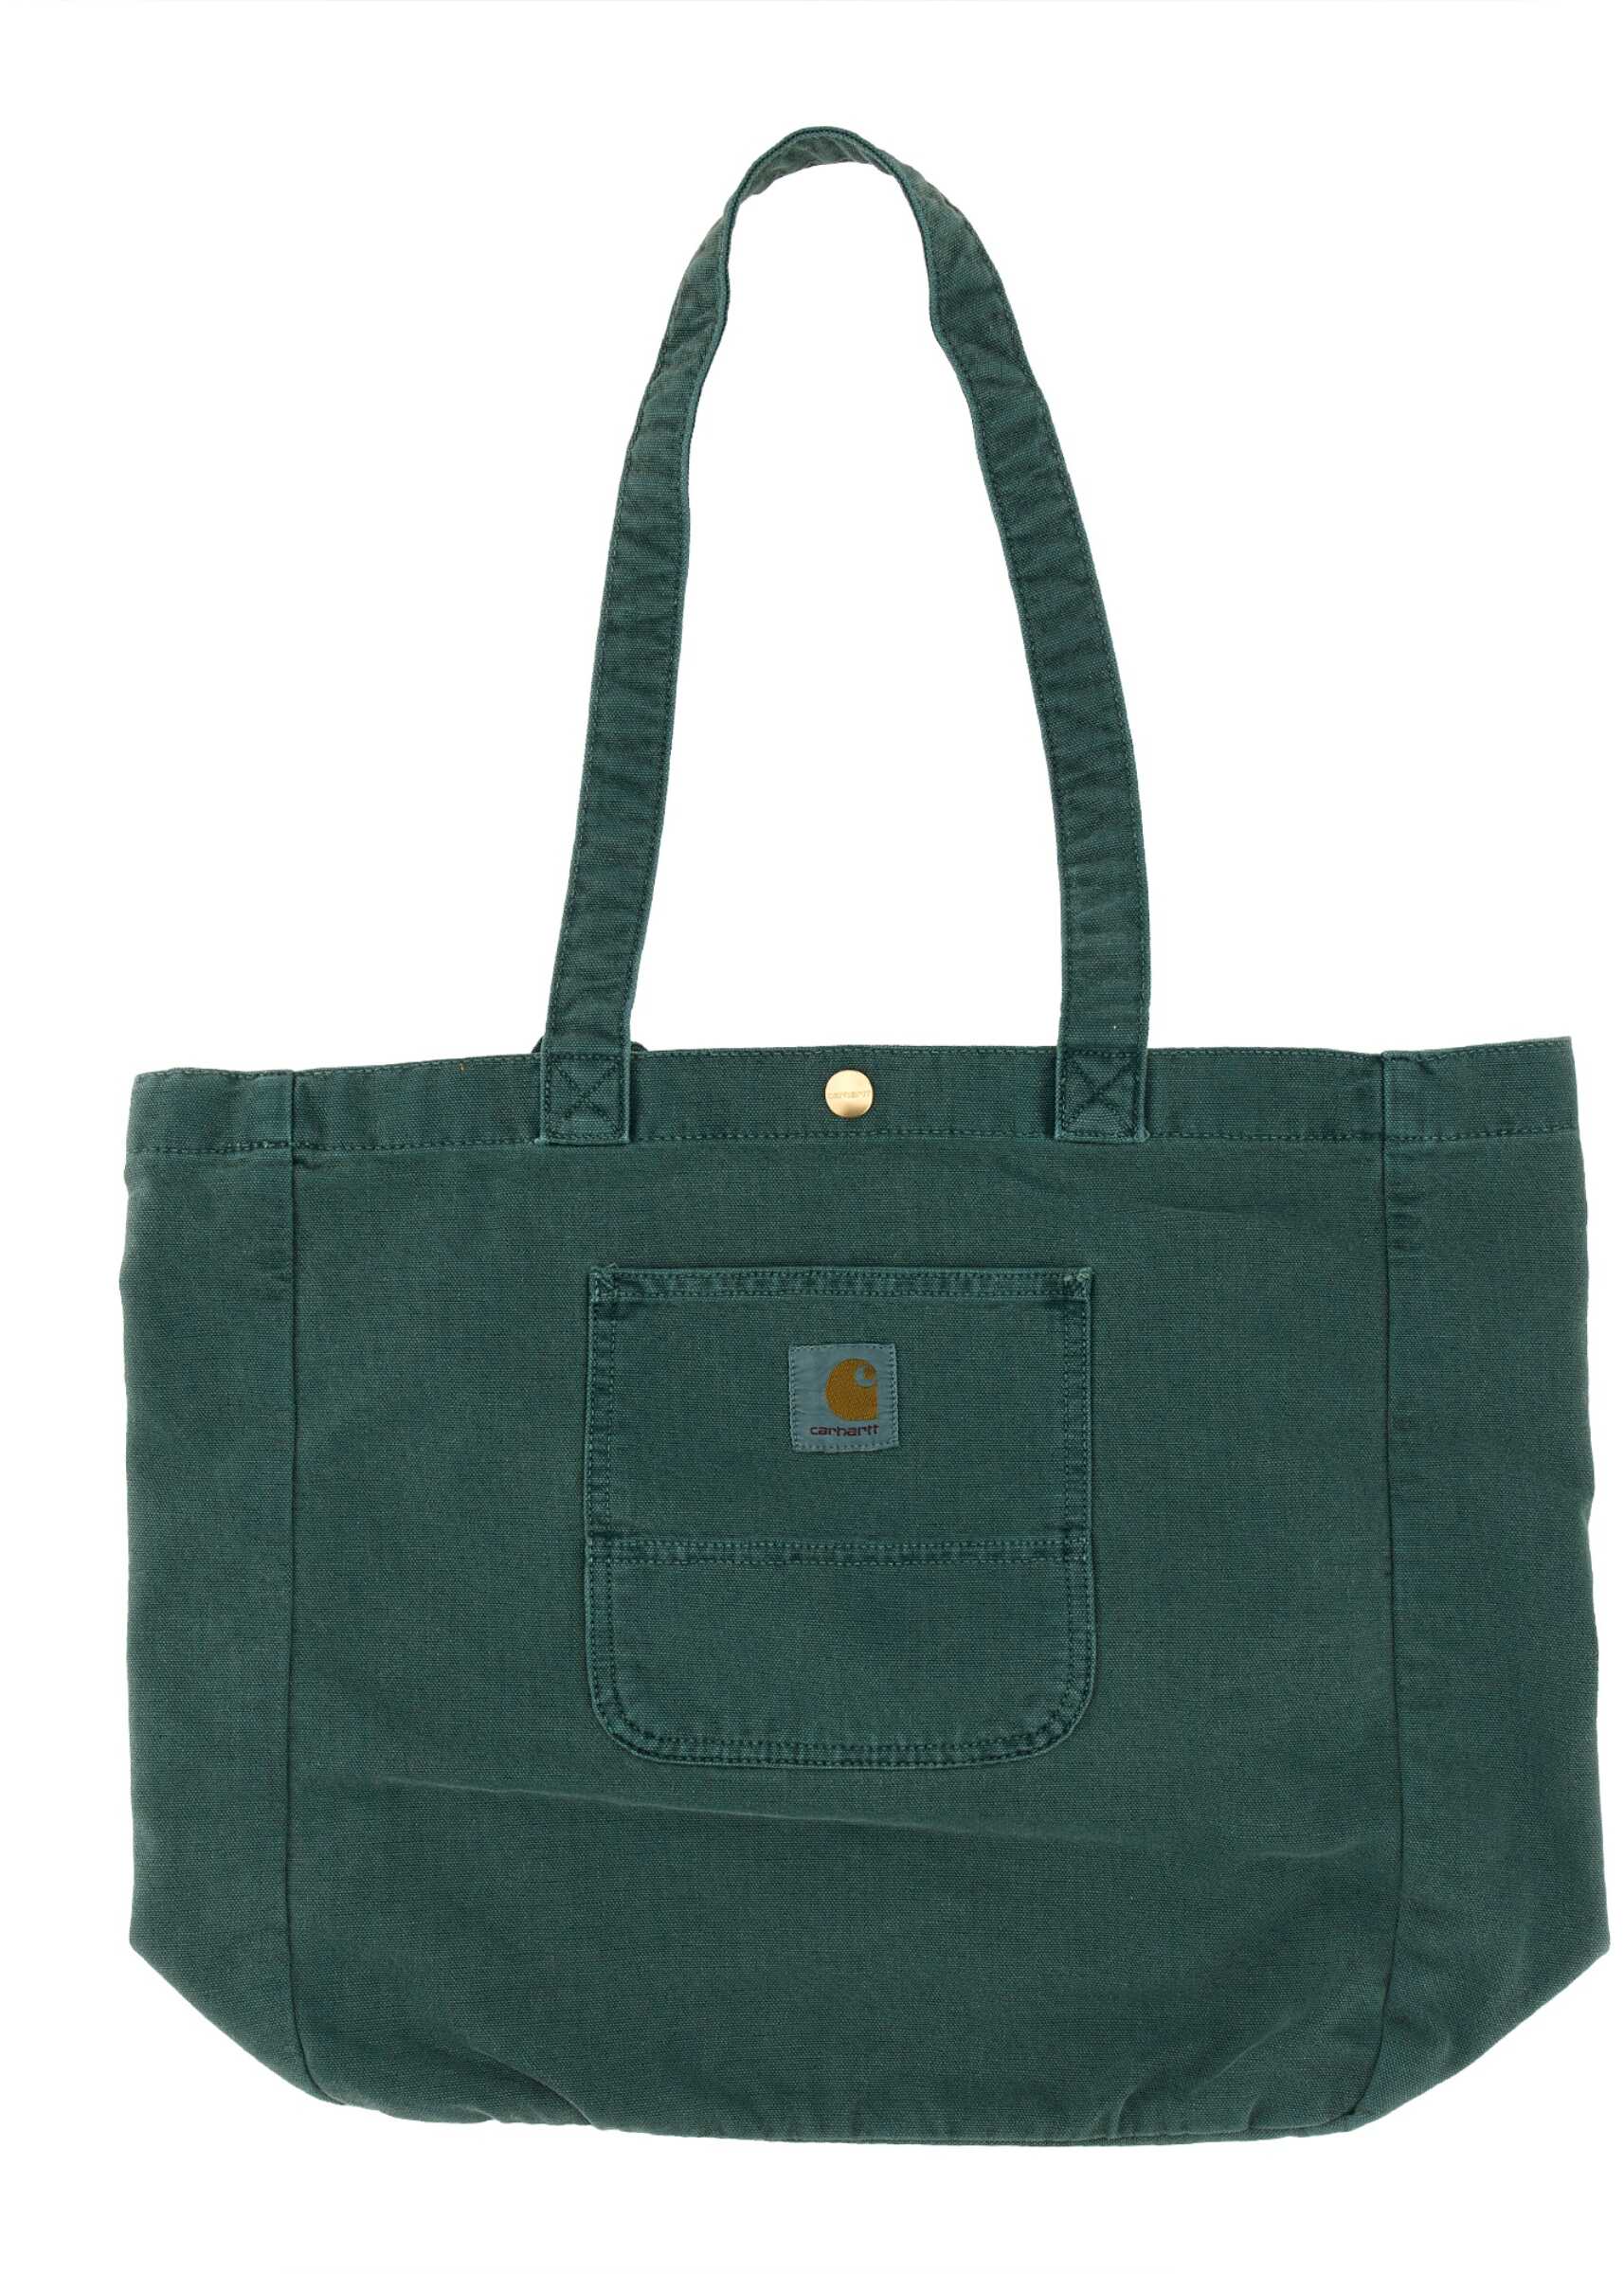 CARHARTT WIP Tote Bag With Logo GREEN